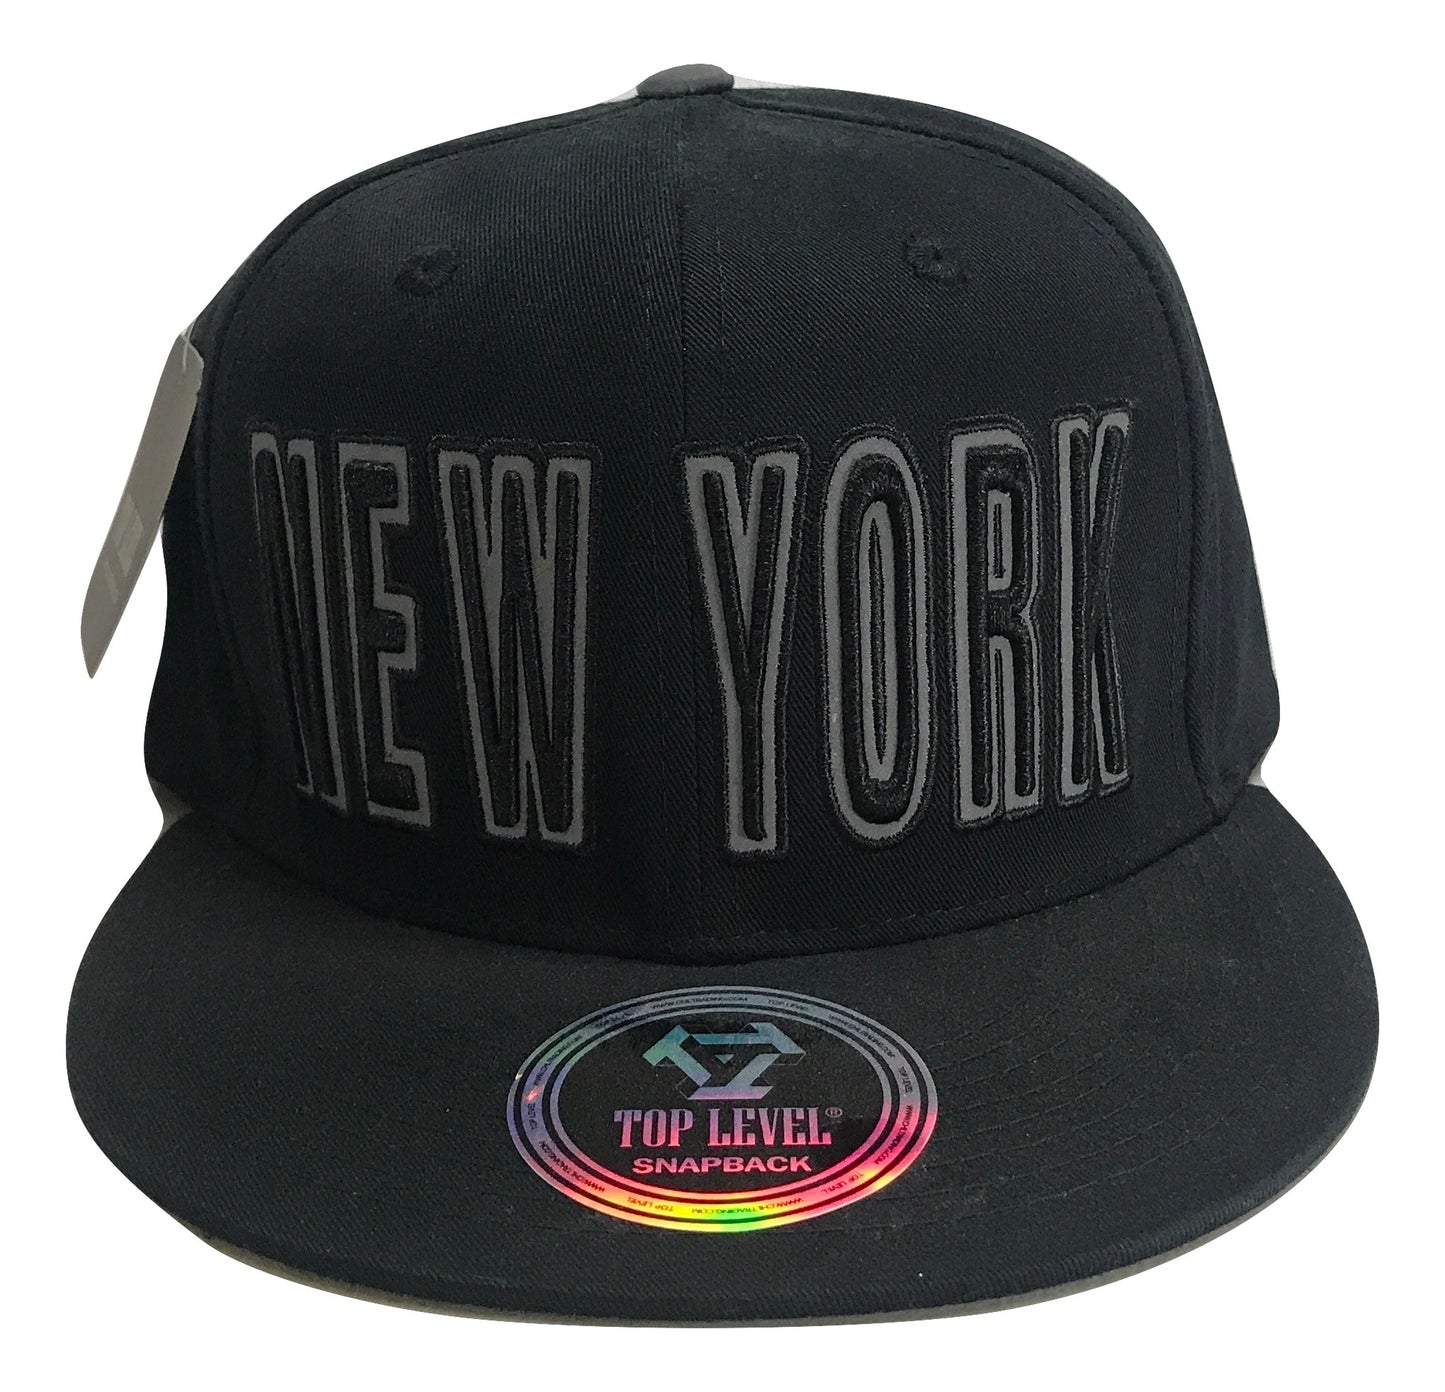 New York Piped Snapback